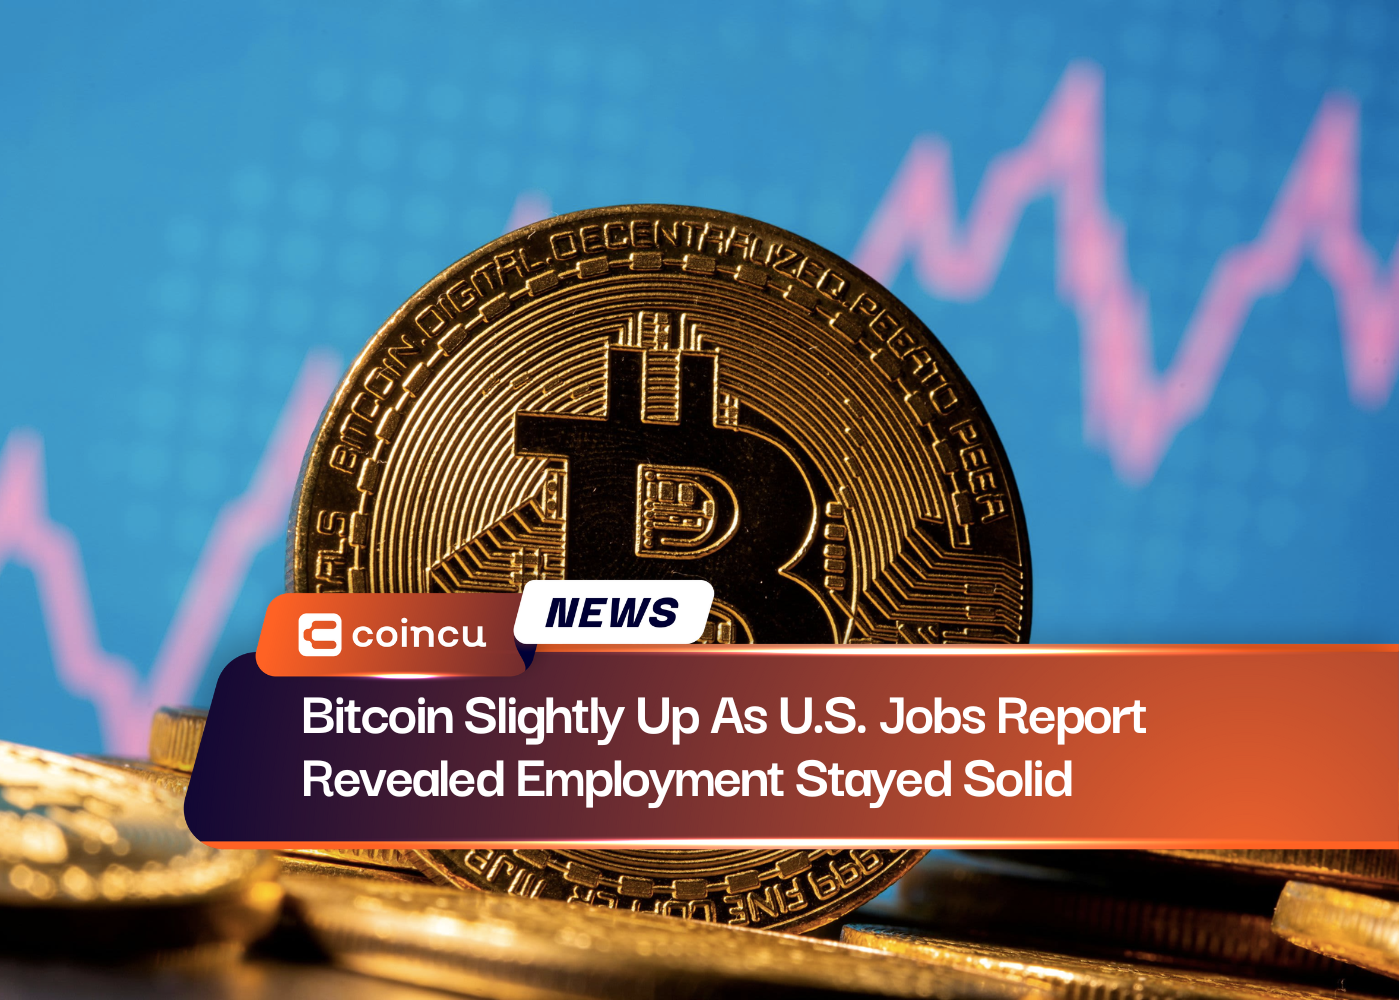 Bitcoin Slightly Up As U.S. Jobs Report Revealed Employment Stayed Solid